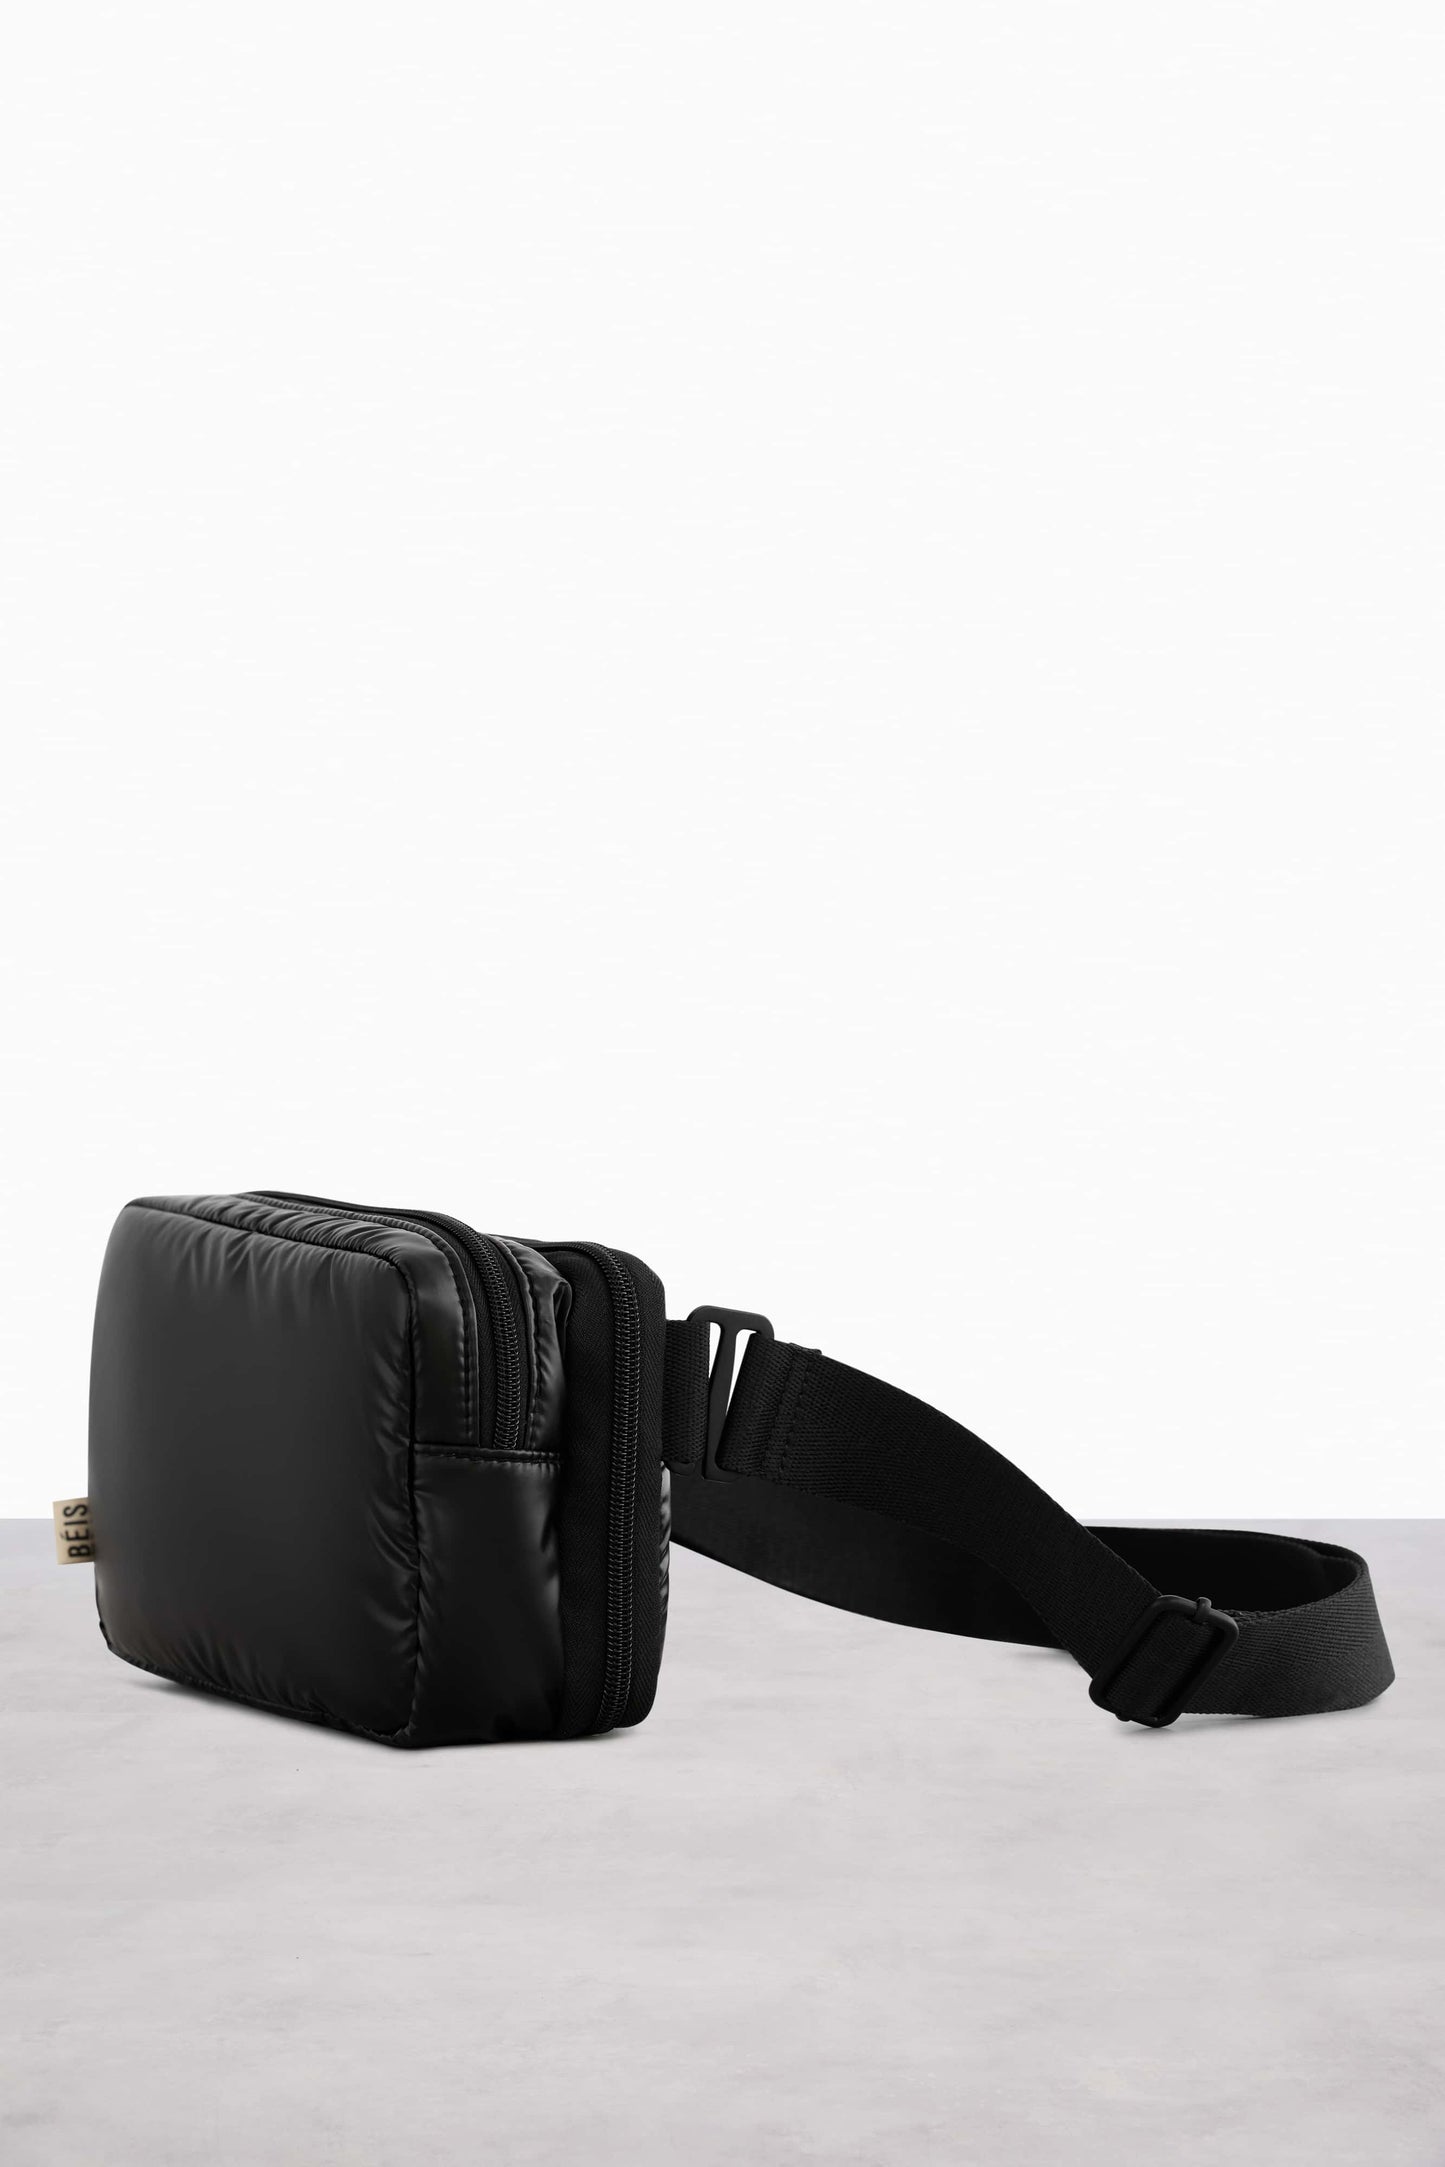 The Expandable Pouch in Black